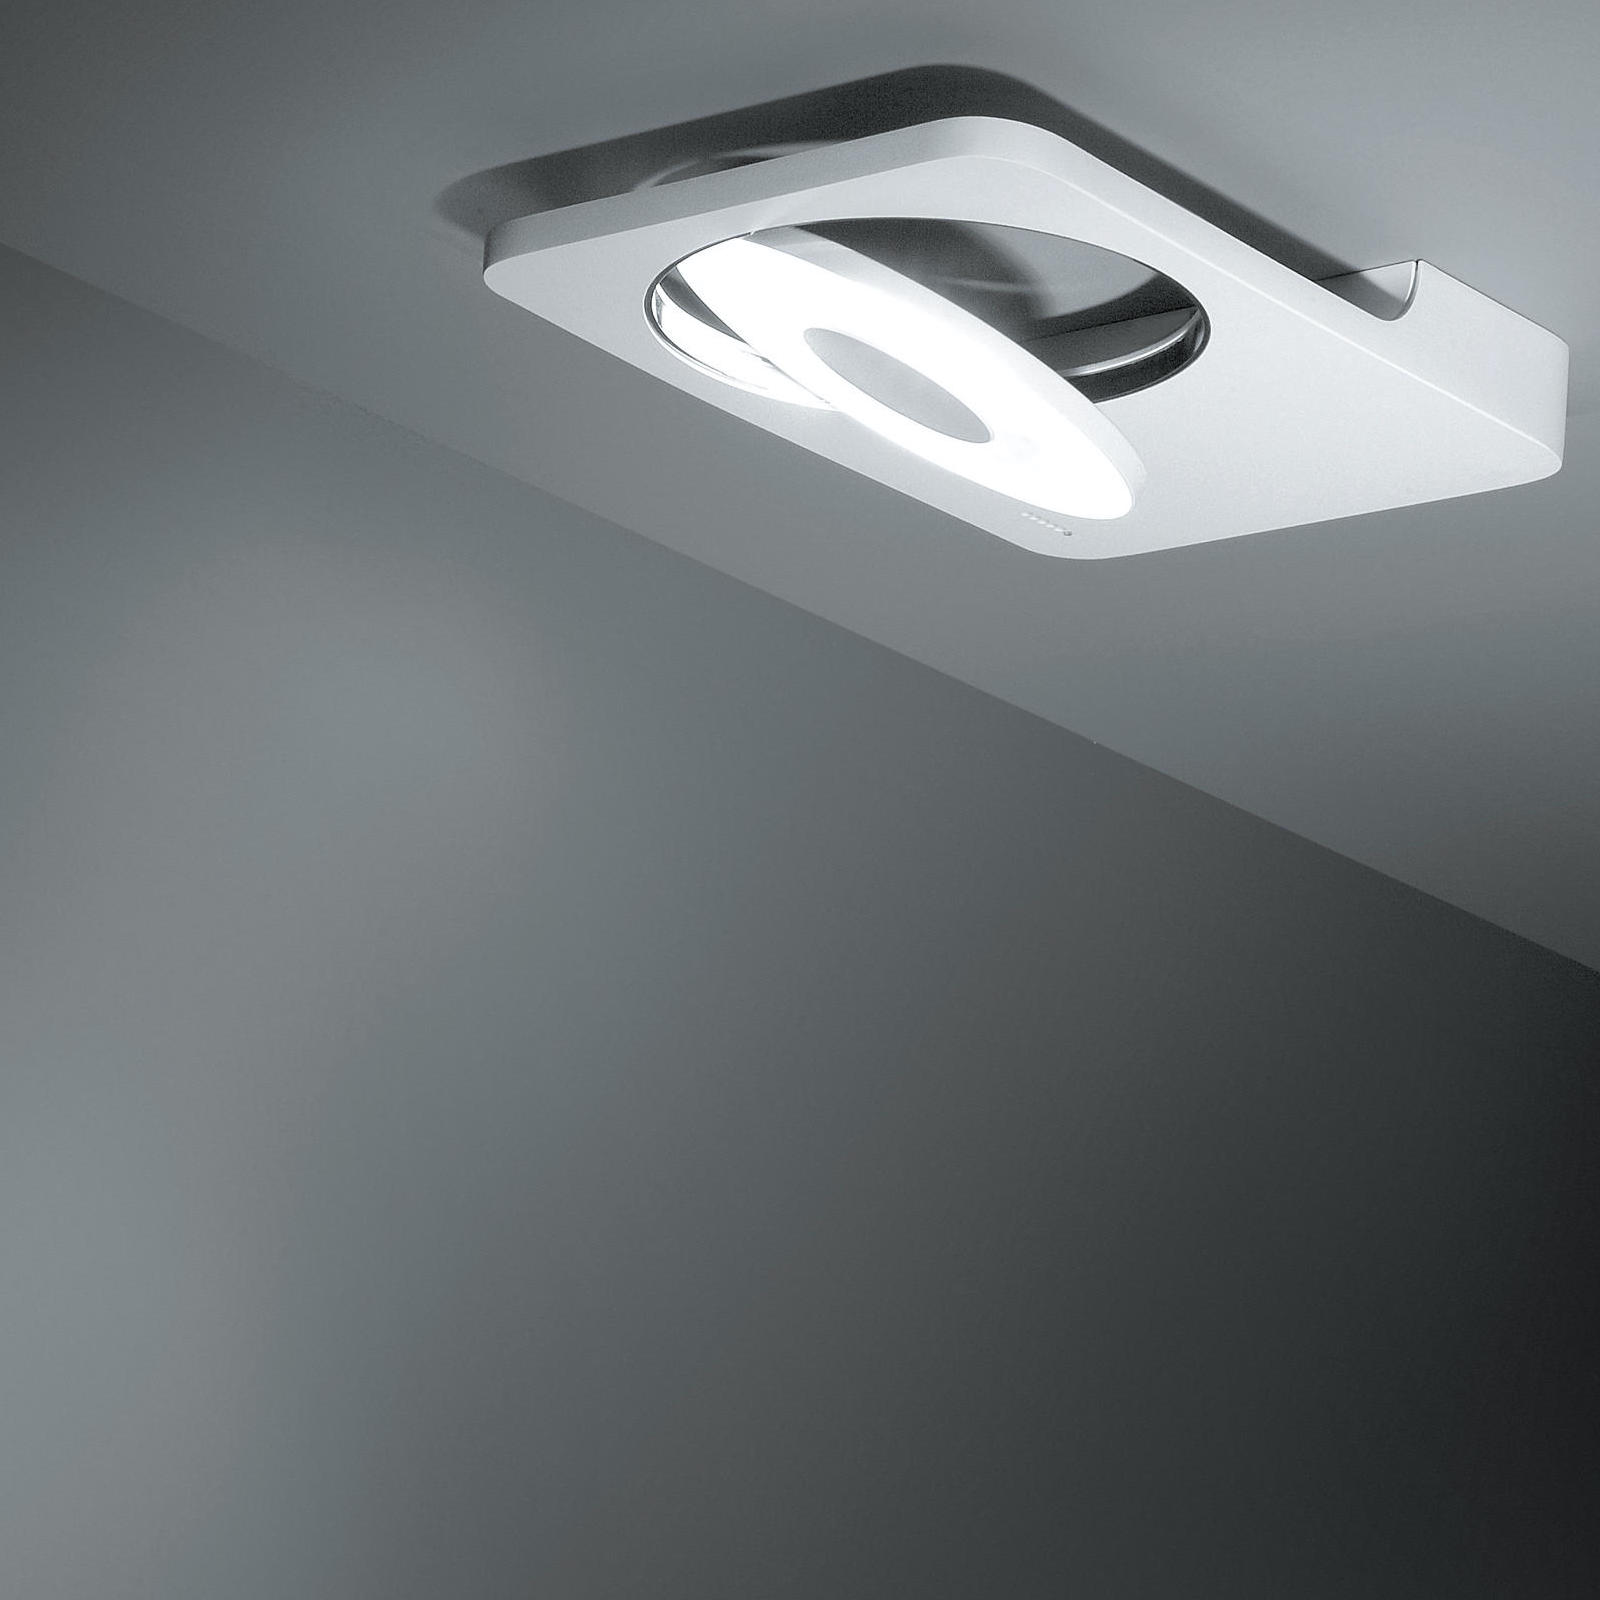 Wall/Ceiling light 'Spock' by Couvreur.devos for Modular Lighting Instruments